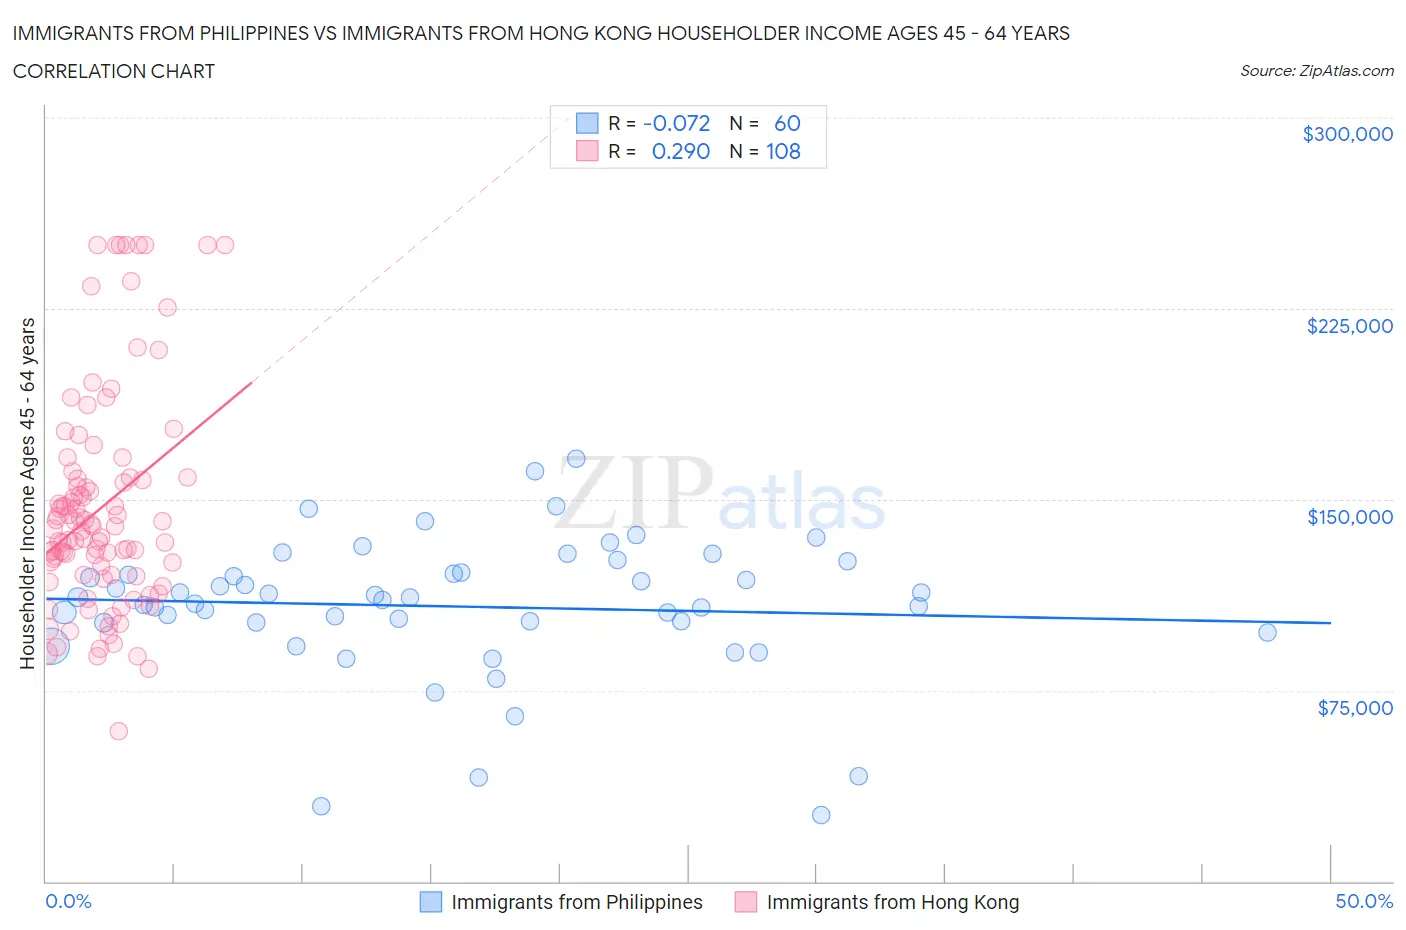 Immigrants from Philippines vs Immigrants from Hong Kong Householder Income Ages 45 - 64 years